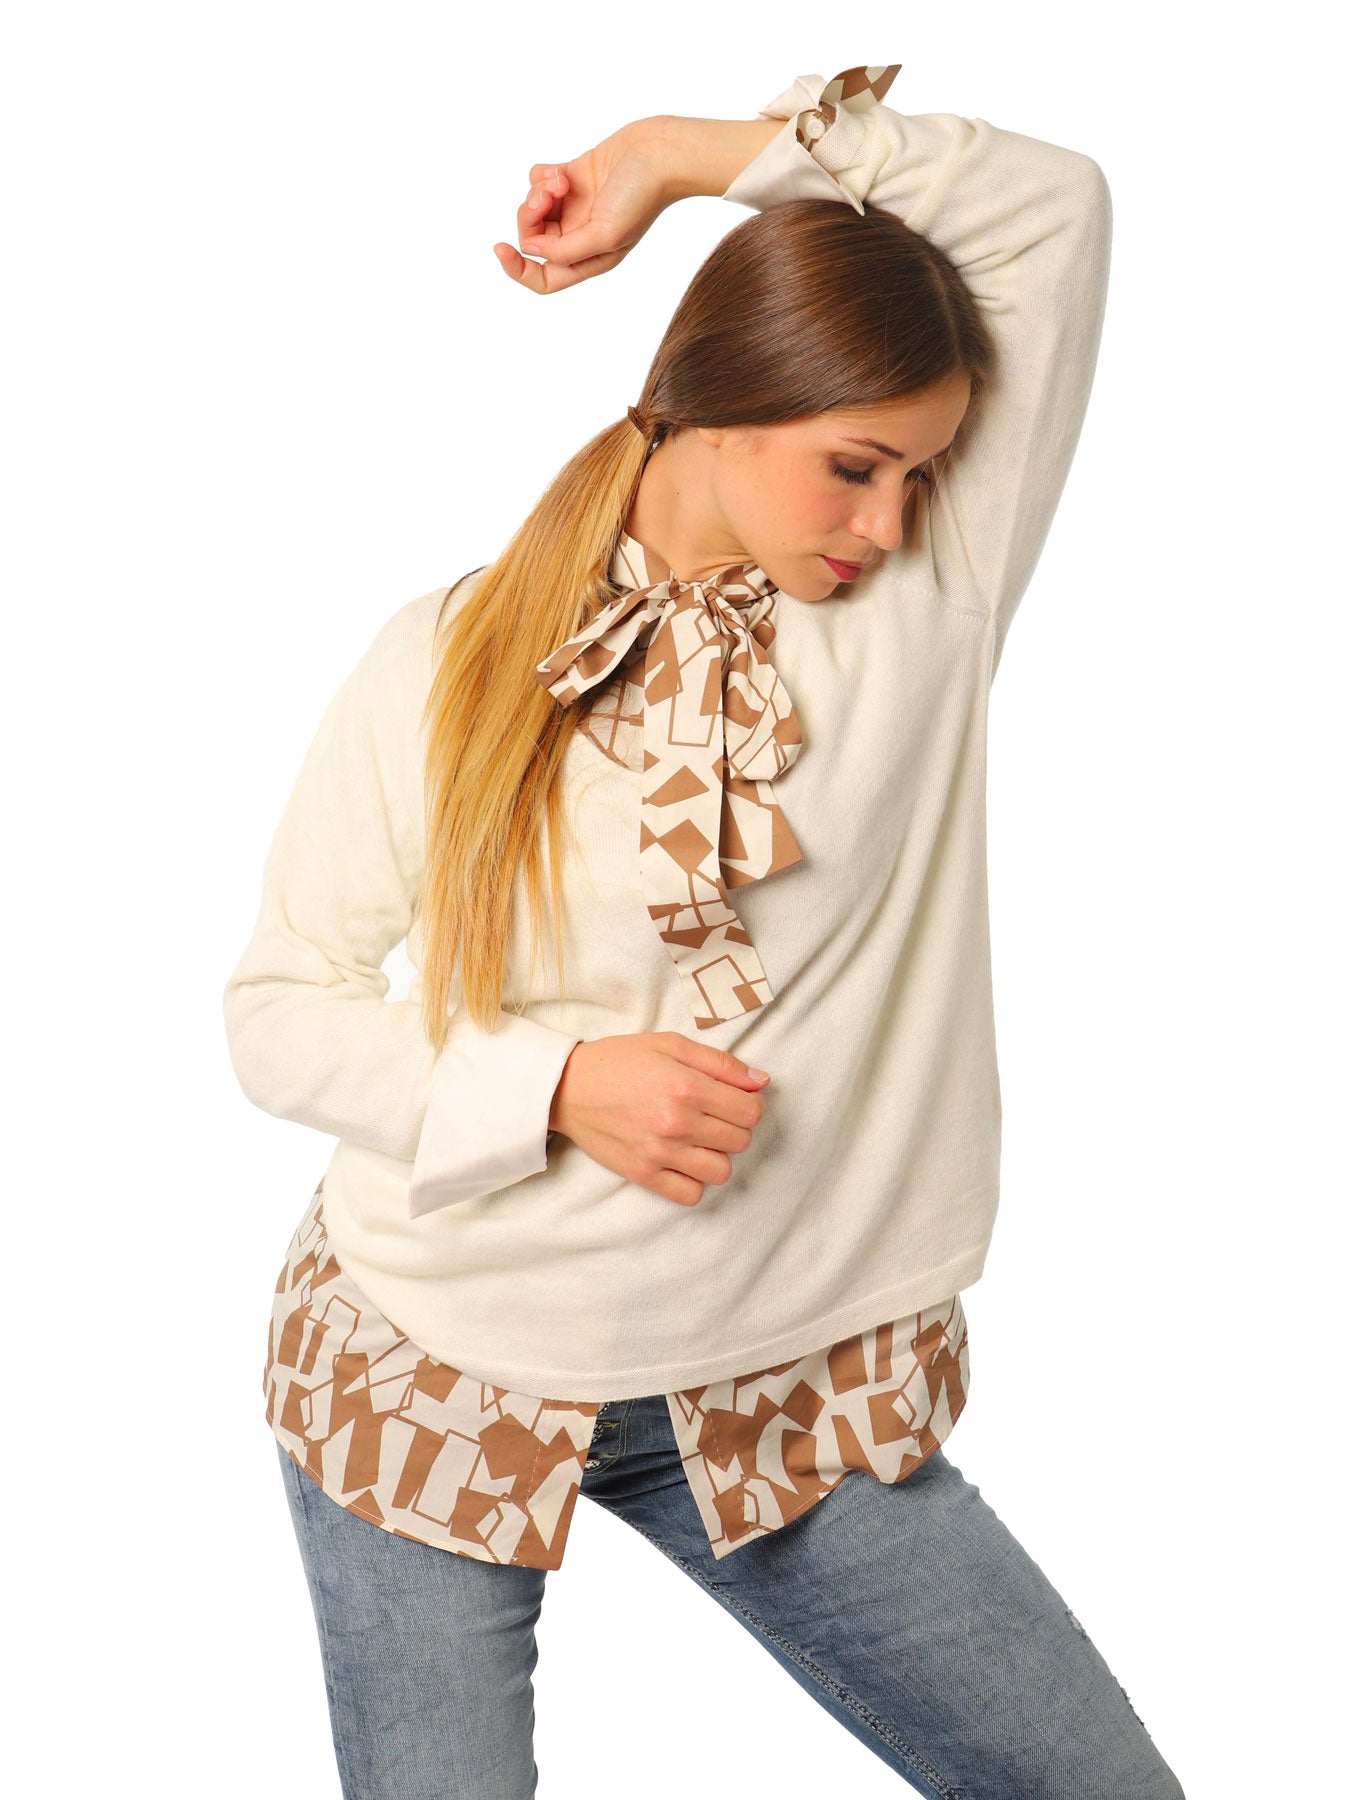 Women's sweater with rounded neckline